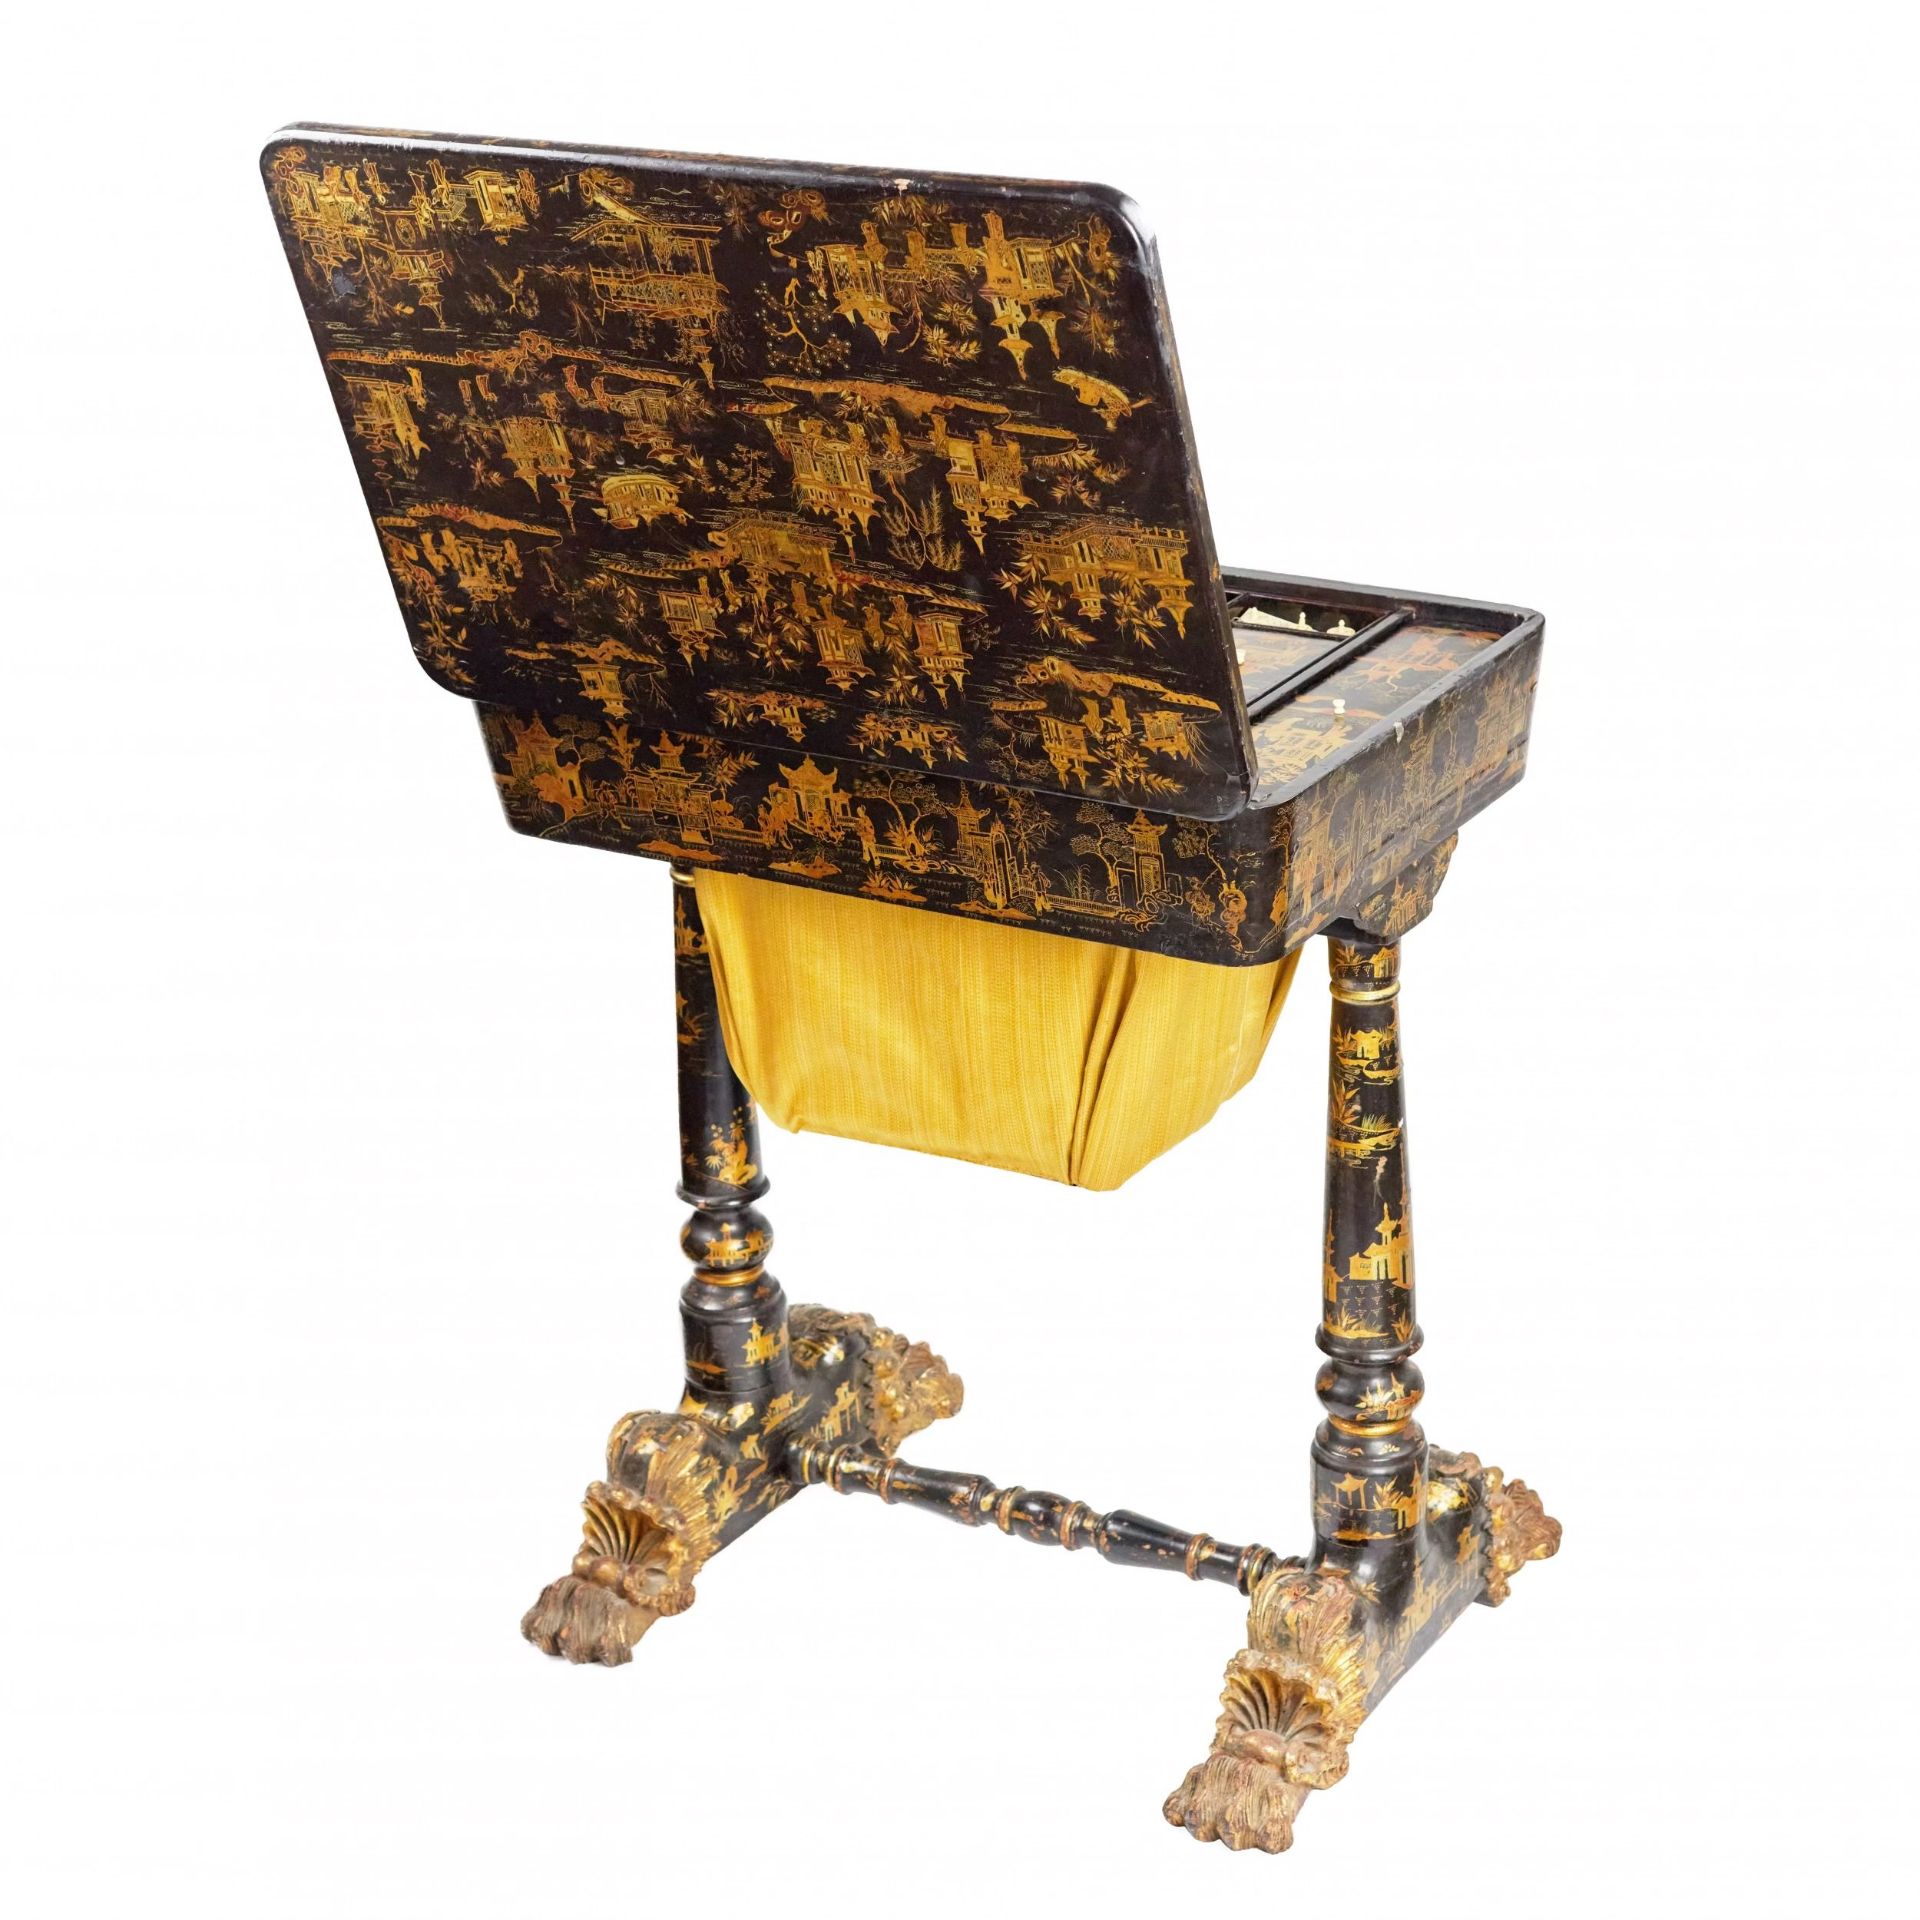 Needlework table made of black and gold Beijing lacquer. 19th century. - Image 8 of 11